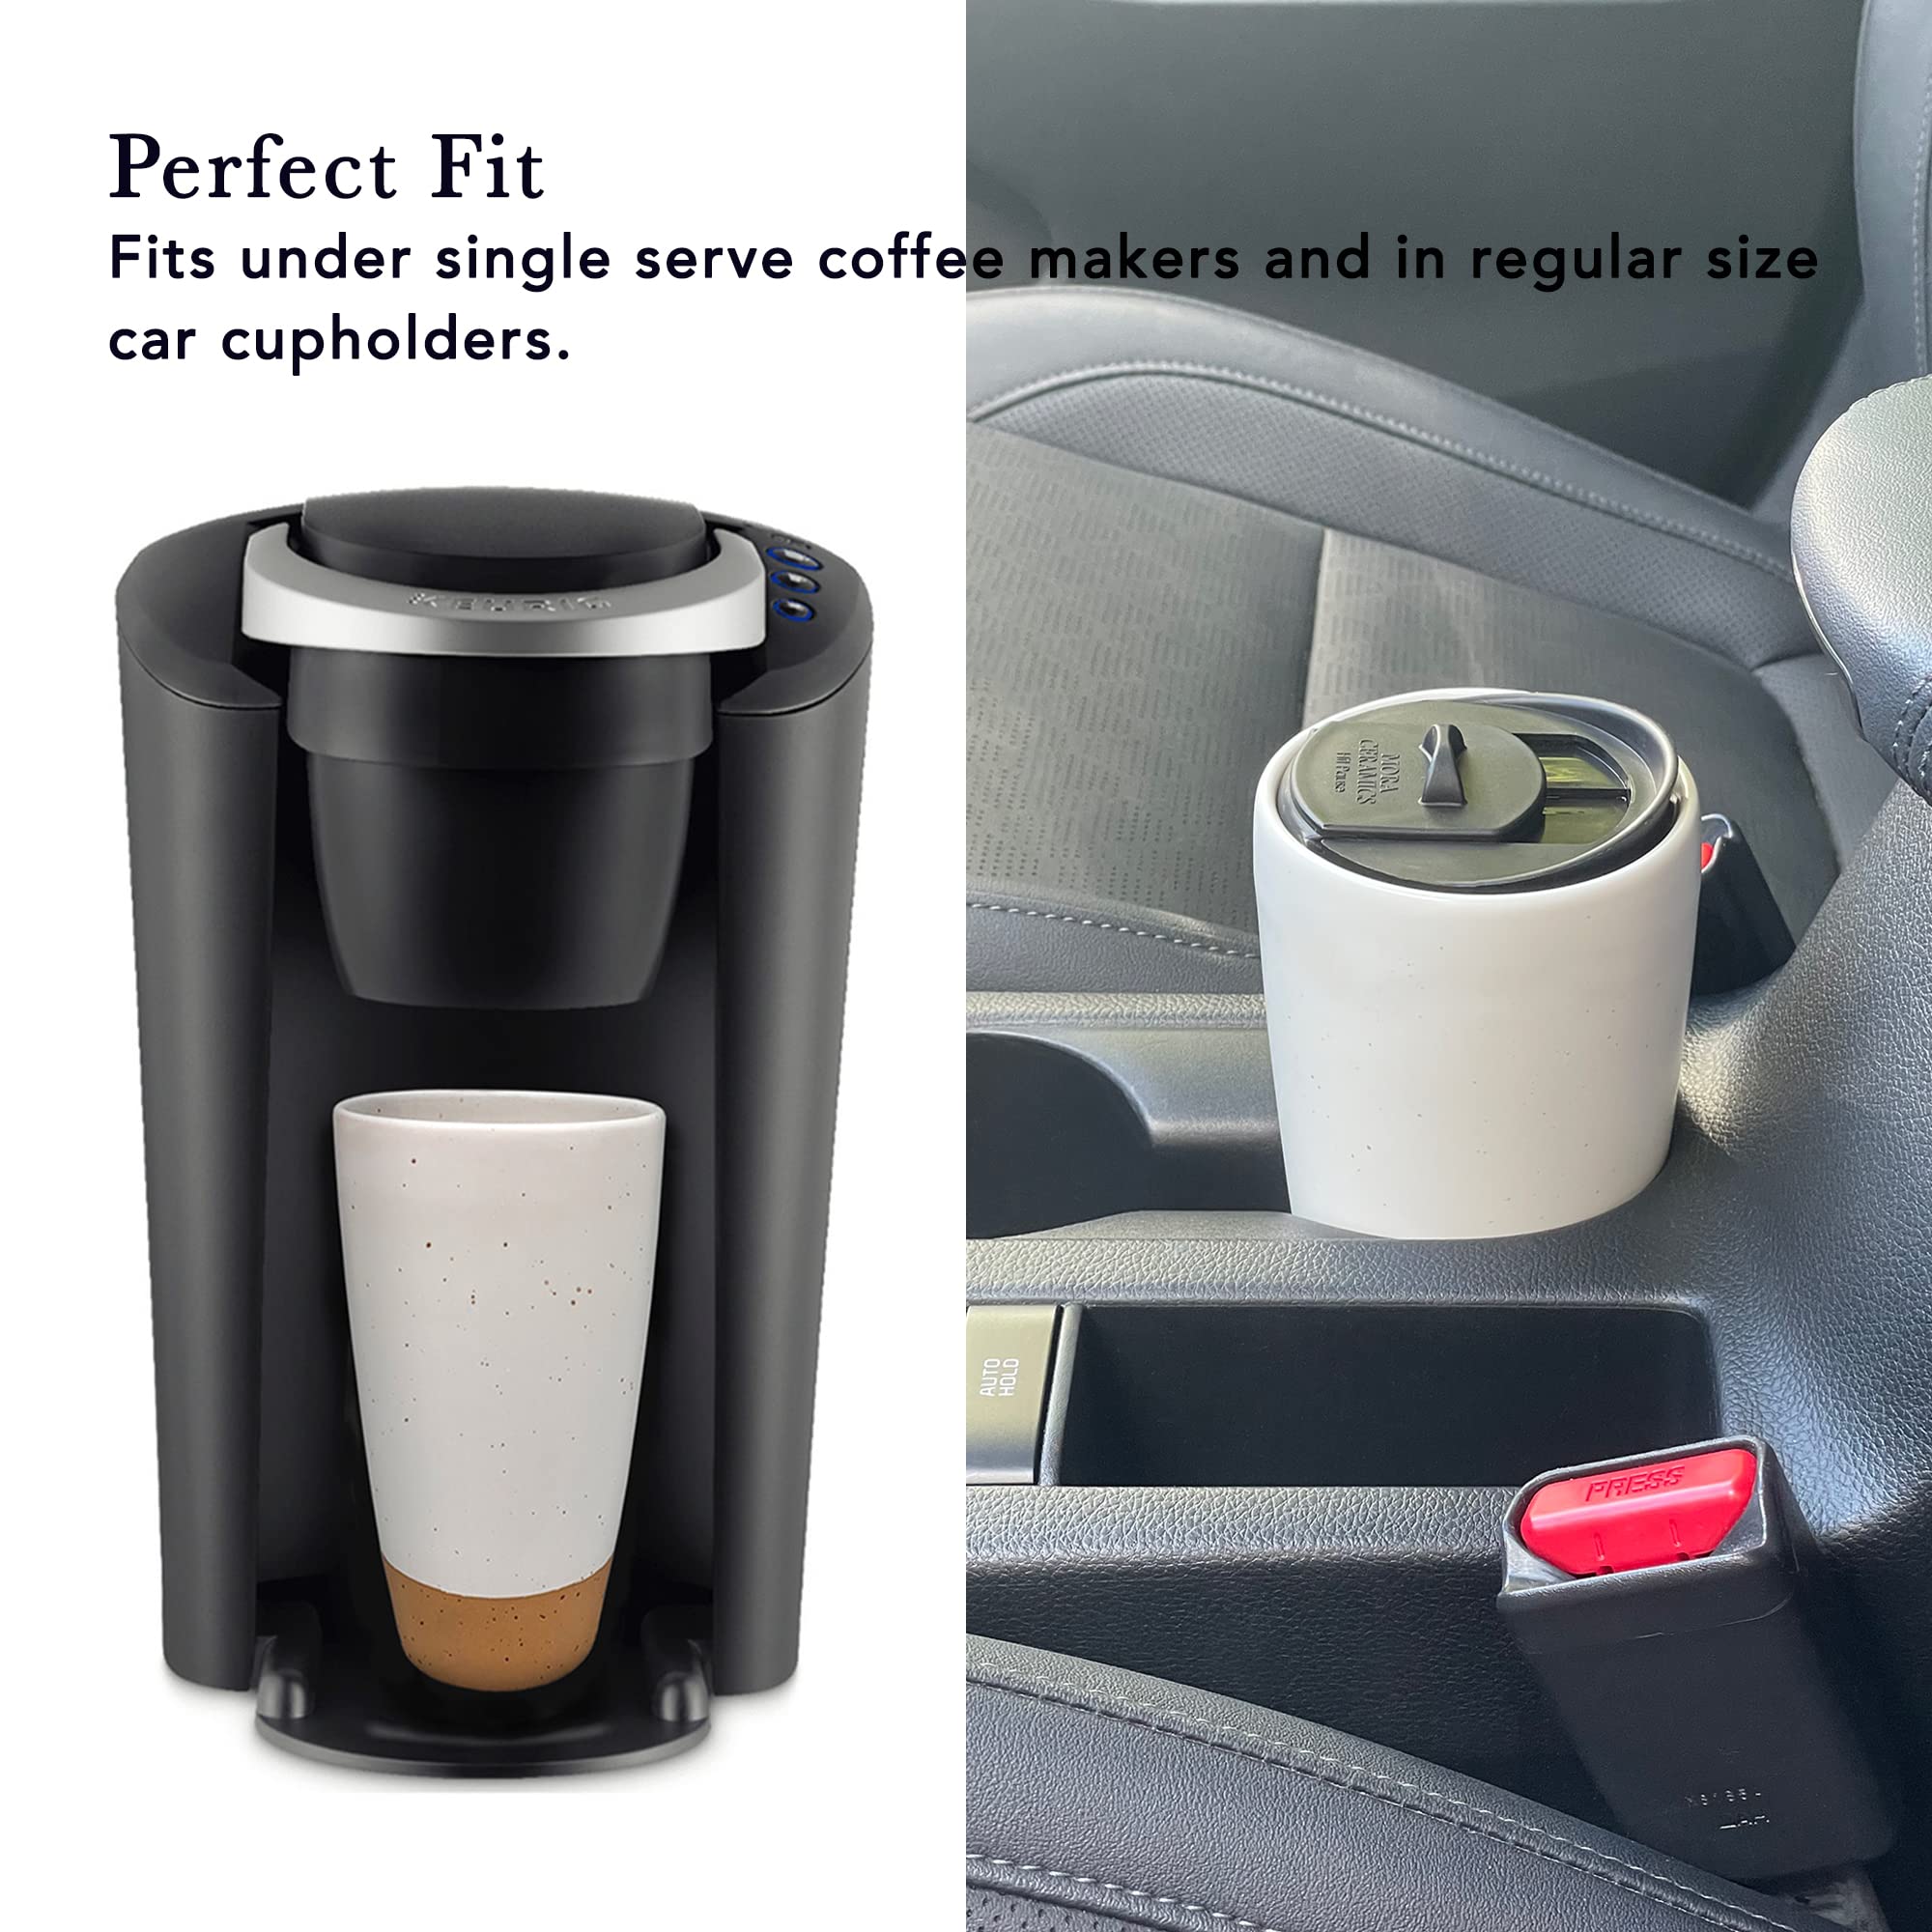 Mora Double Wall Ceramic Coffee Travel Mug with Lid, 14 oz, Portable, Microwave, Dishwasher Safe, Insulated Reusable Tall Cup, Splash Resistant Lid - To Go Tumbler for Car Cup Holder, Seafoam